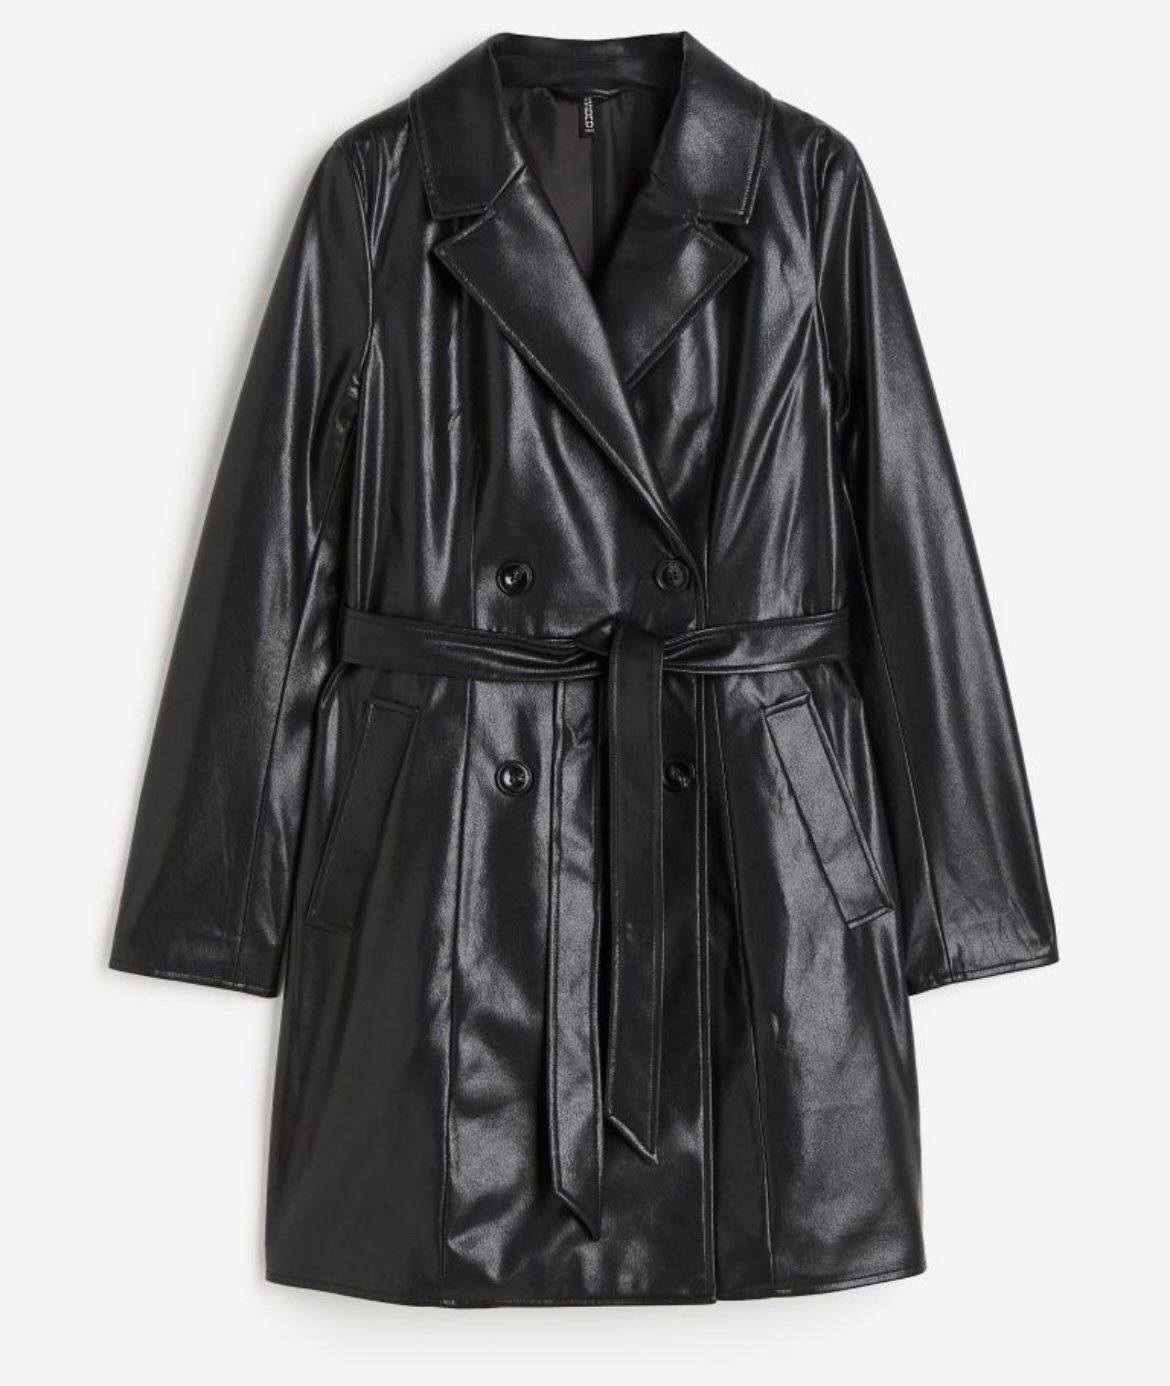 New Faux-Leather Crocodile Trench Coat for Sale in Detroit, MI - OfferUp